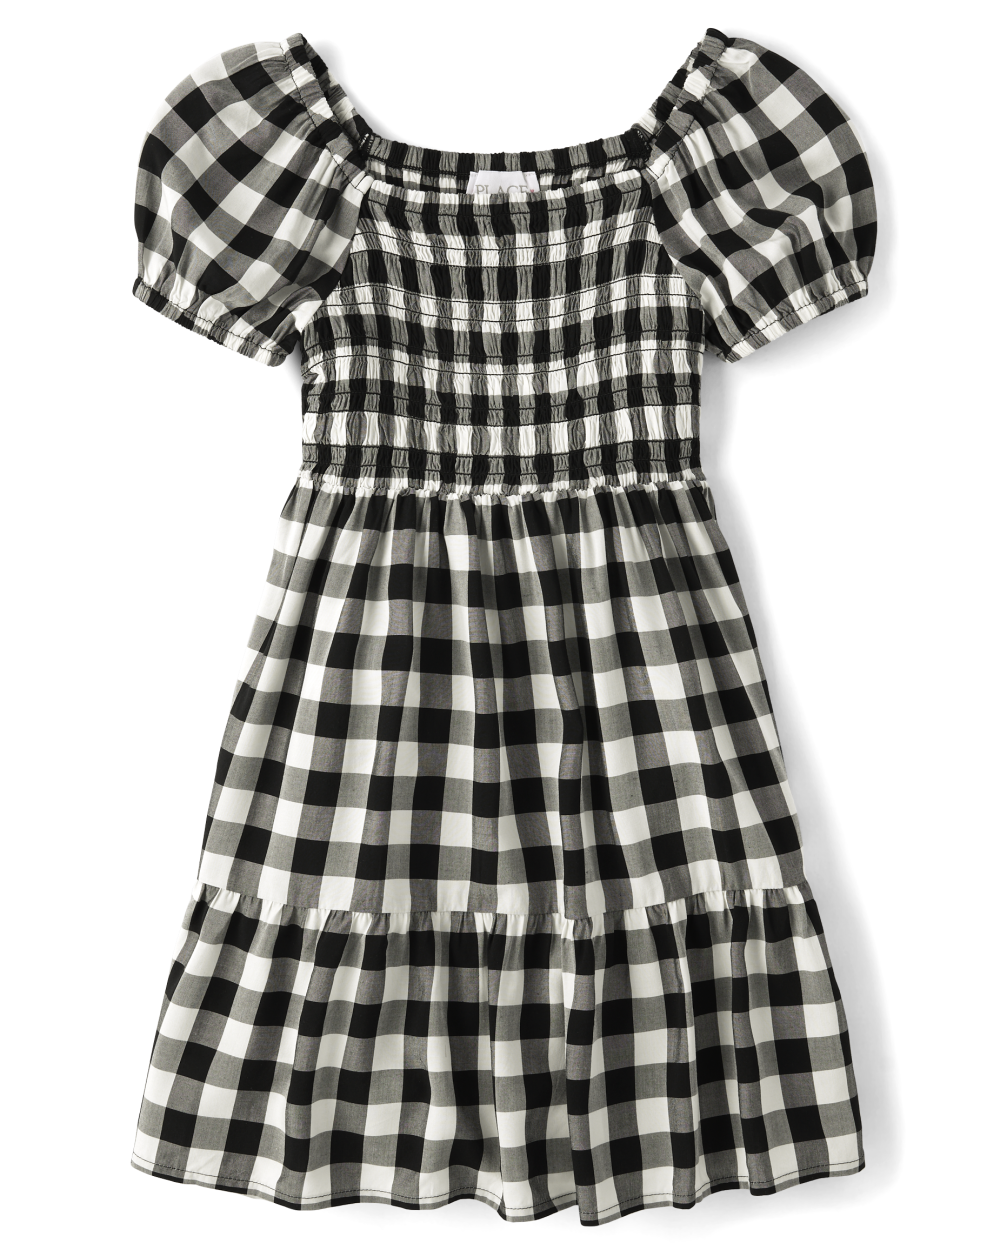 Girls Above the Knee Puff Sleeves Short Sleeves Sleeves Rayon Smocked Square Neck Checkered Gingham Print Dress With Ruffles